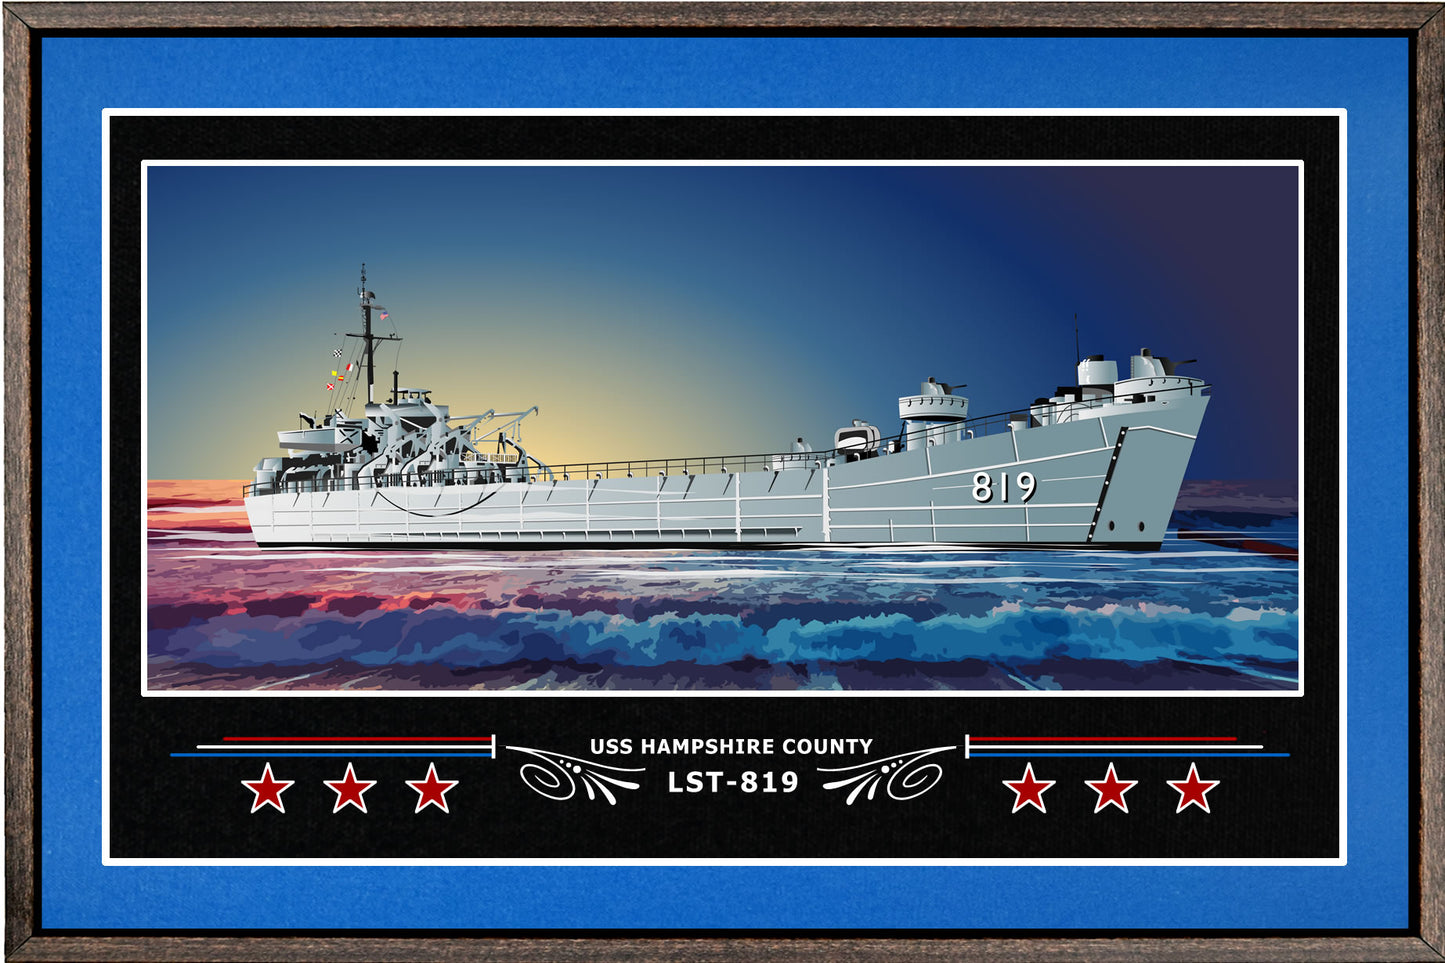 USS HAMPSHIRE COUNTY LST 819 BOX FRAMED CANVAS ART BLUE